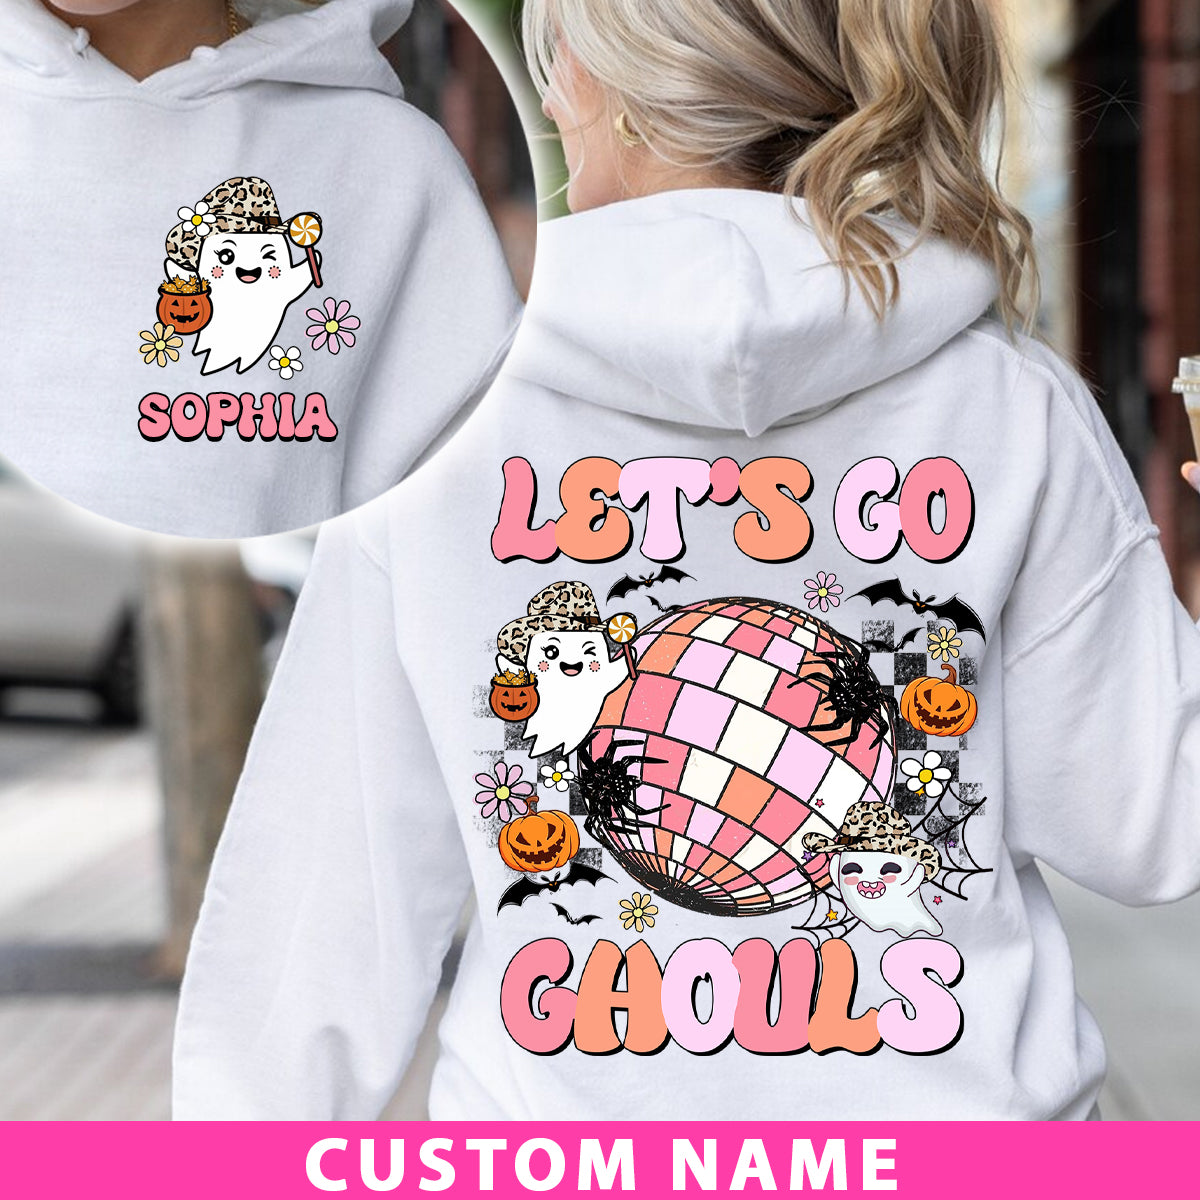 Let's Go Ghouls- Custom Name - Personalized 2 Side Hoodie - Halloween Family Gift